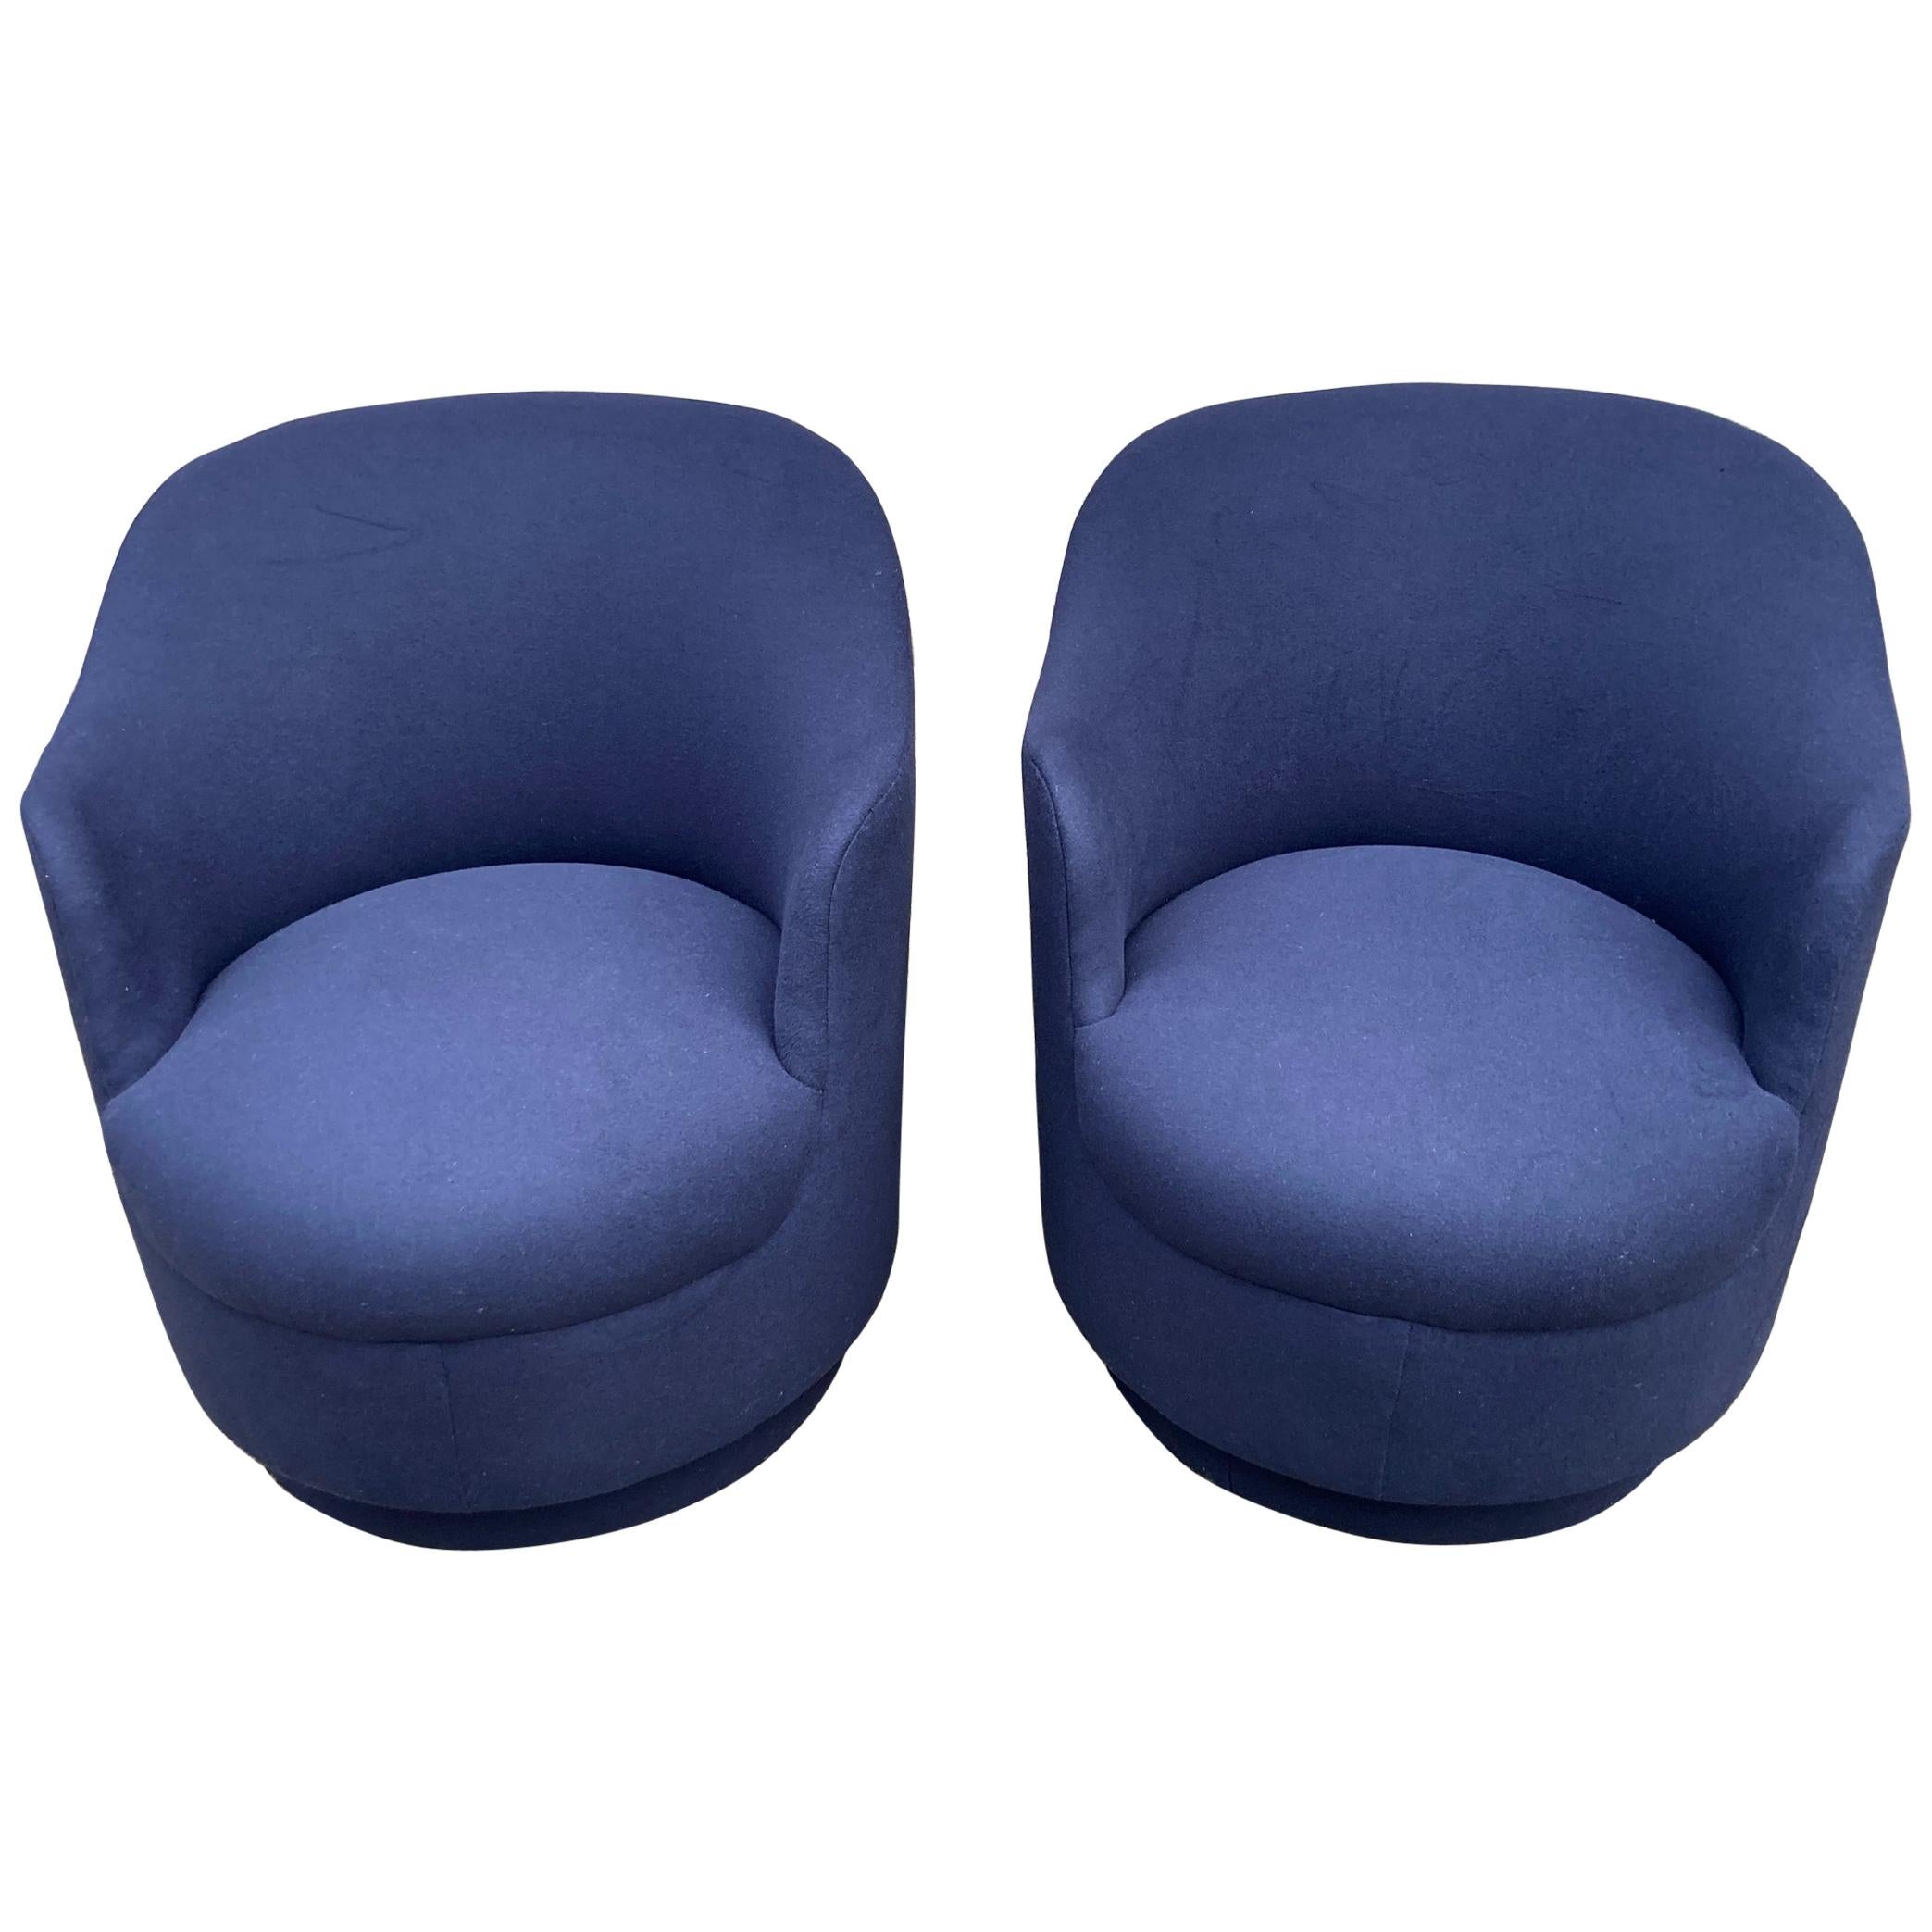 Pair of Navy Blue Upholstered Swivel Chairs Attributed to Milo Baughman For Sale